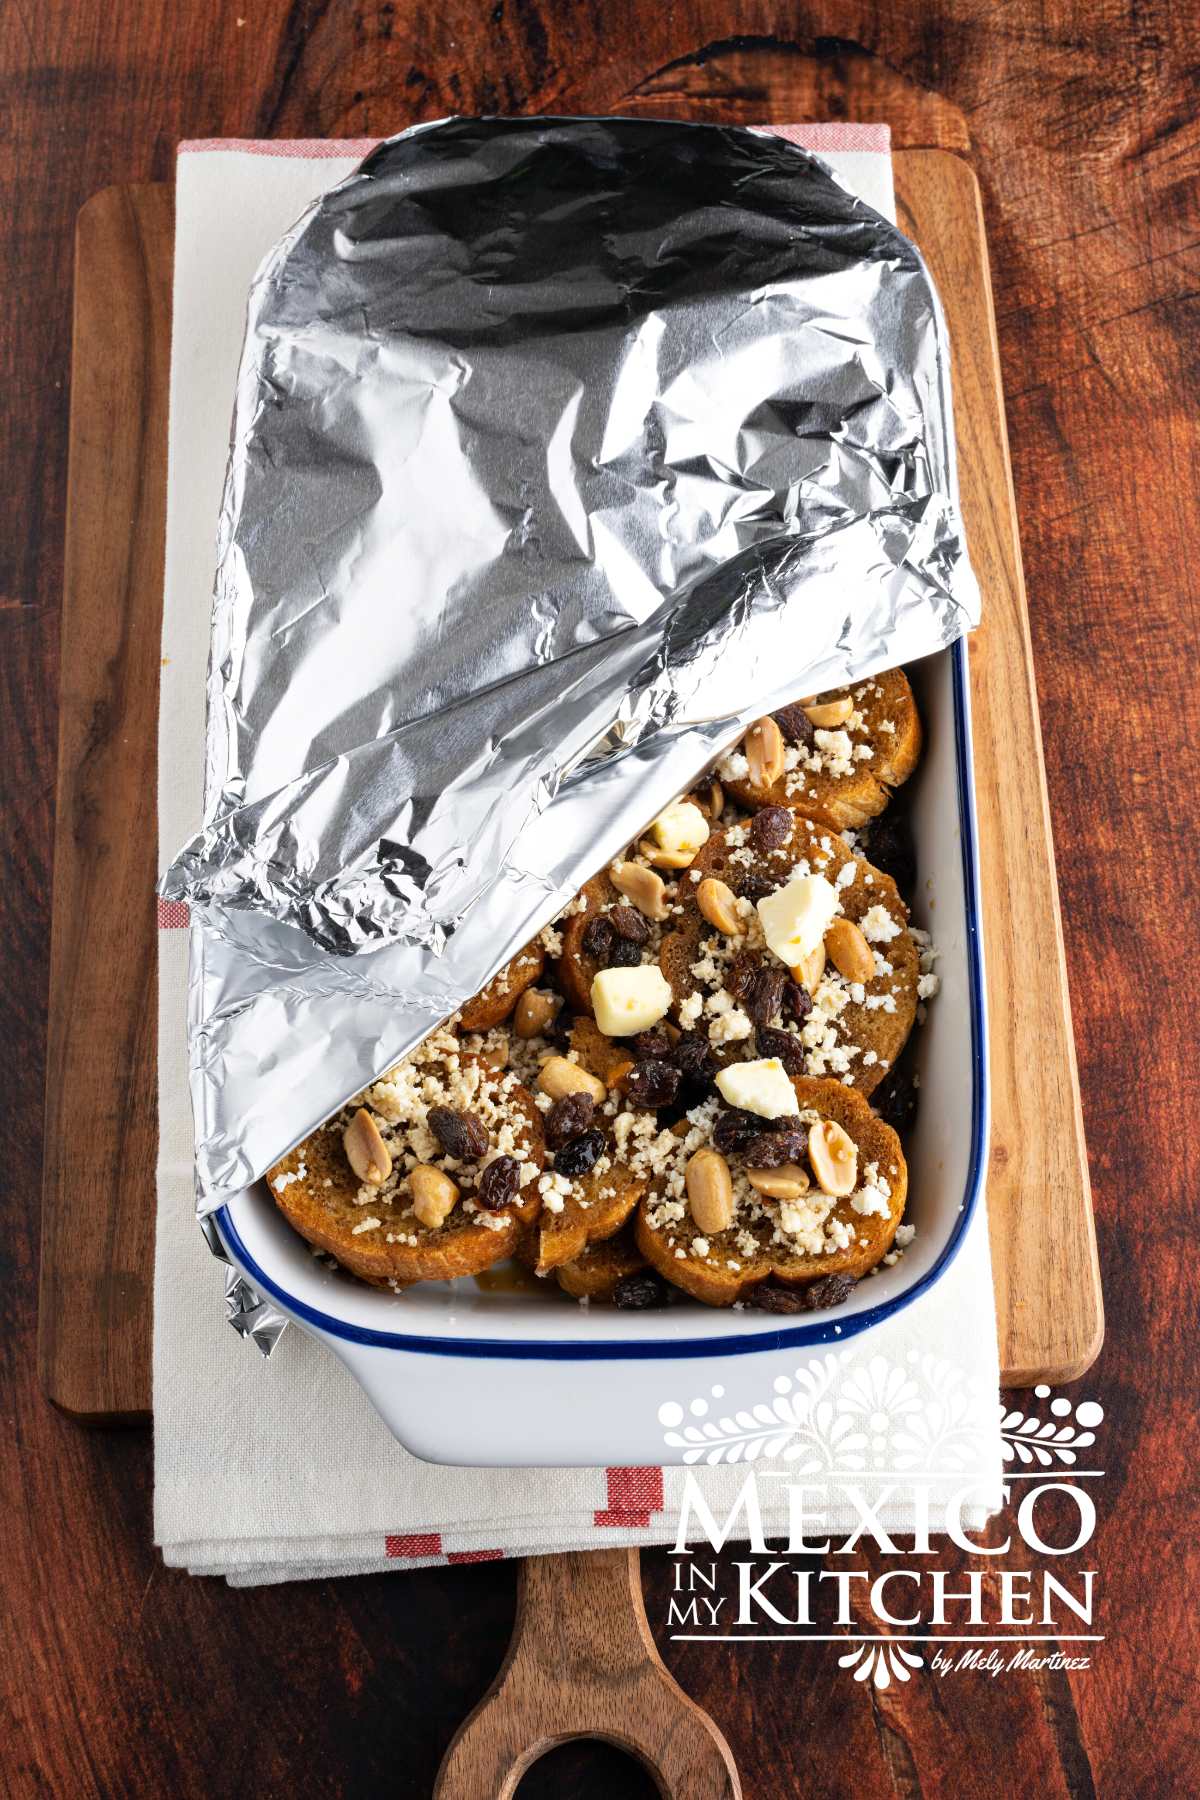 Toasted slices of bread topped with piloncillo cinnamon syrup, cheese, peanuts, and raisins, covered with aluminum foil.